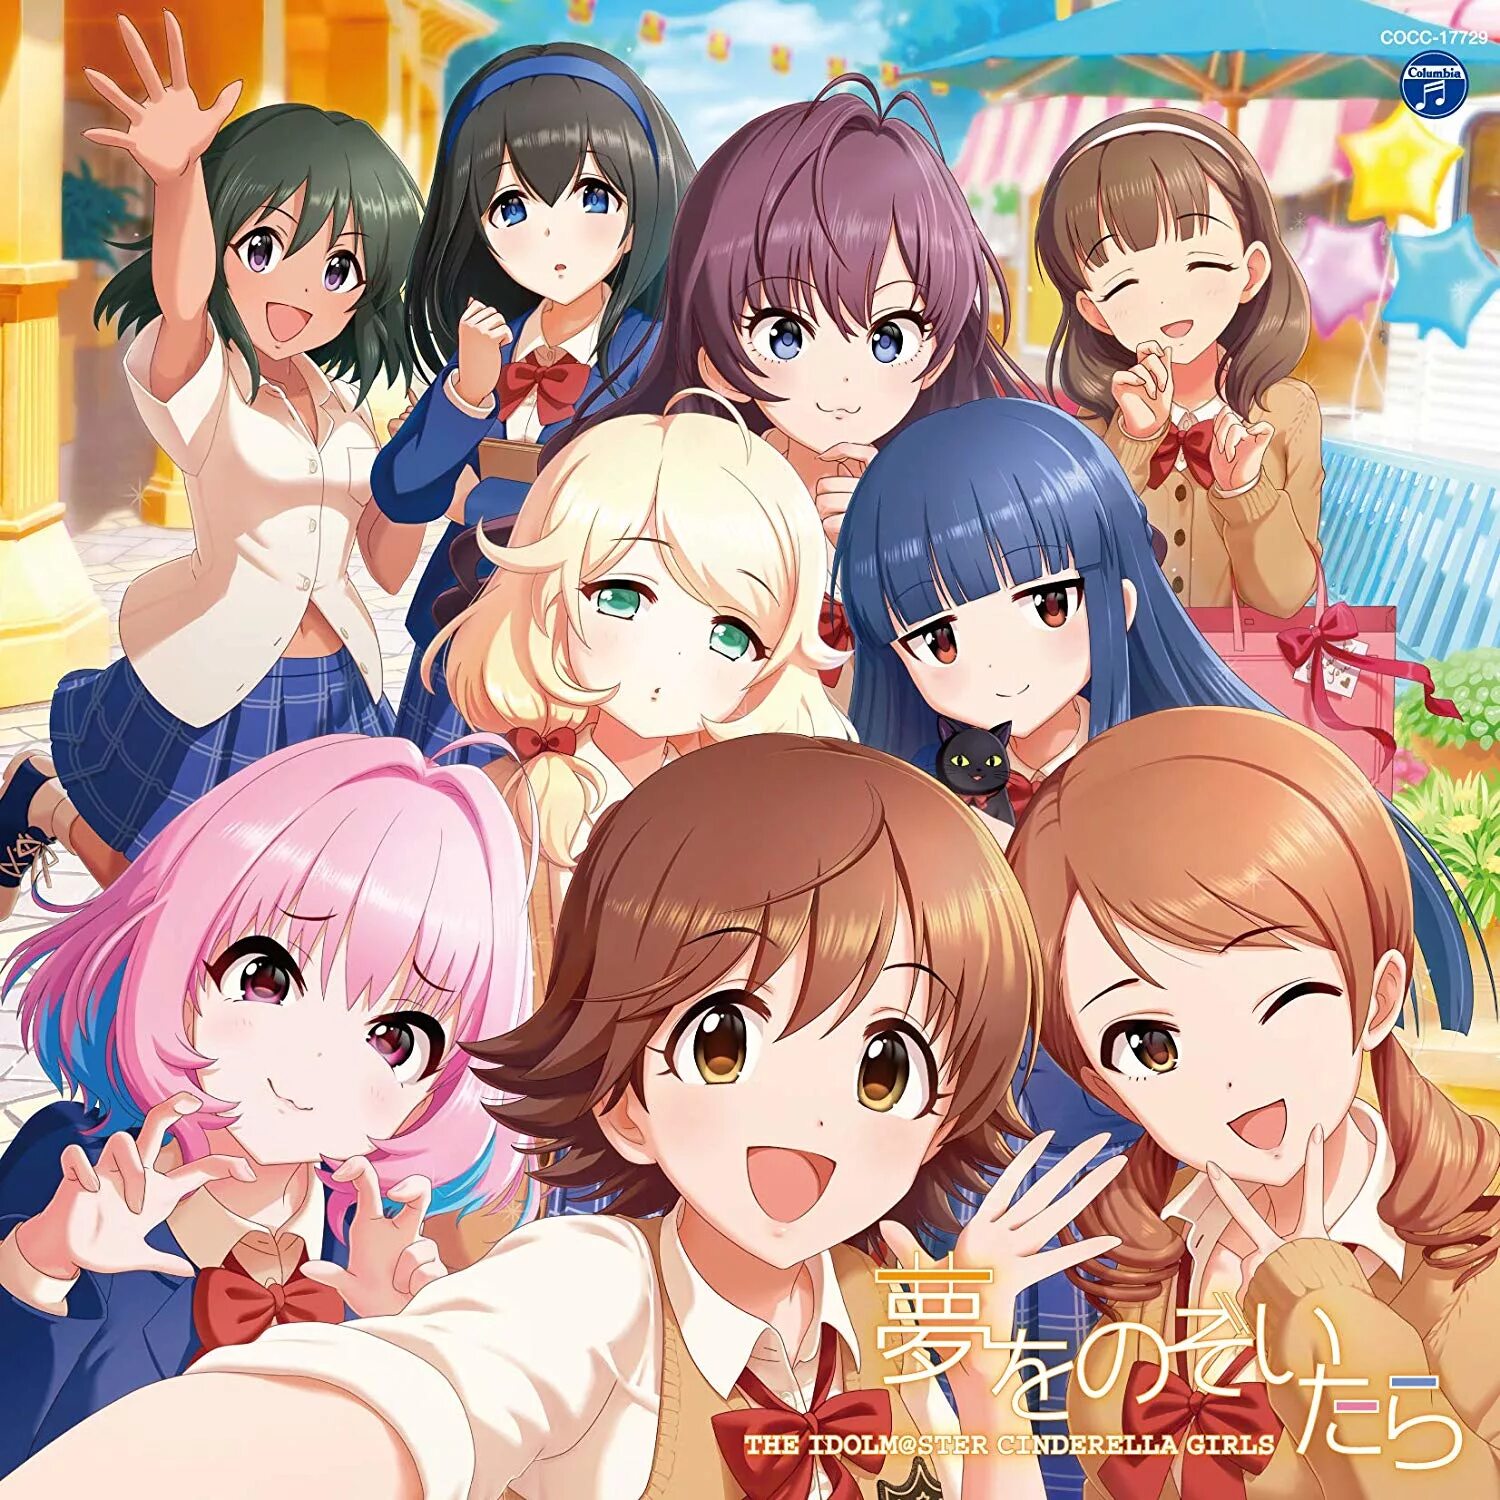 The IDOLM@STER Золушки. The IDOLM@STER Cinderella girls игра. M@S - the IDOLM@STER.